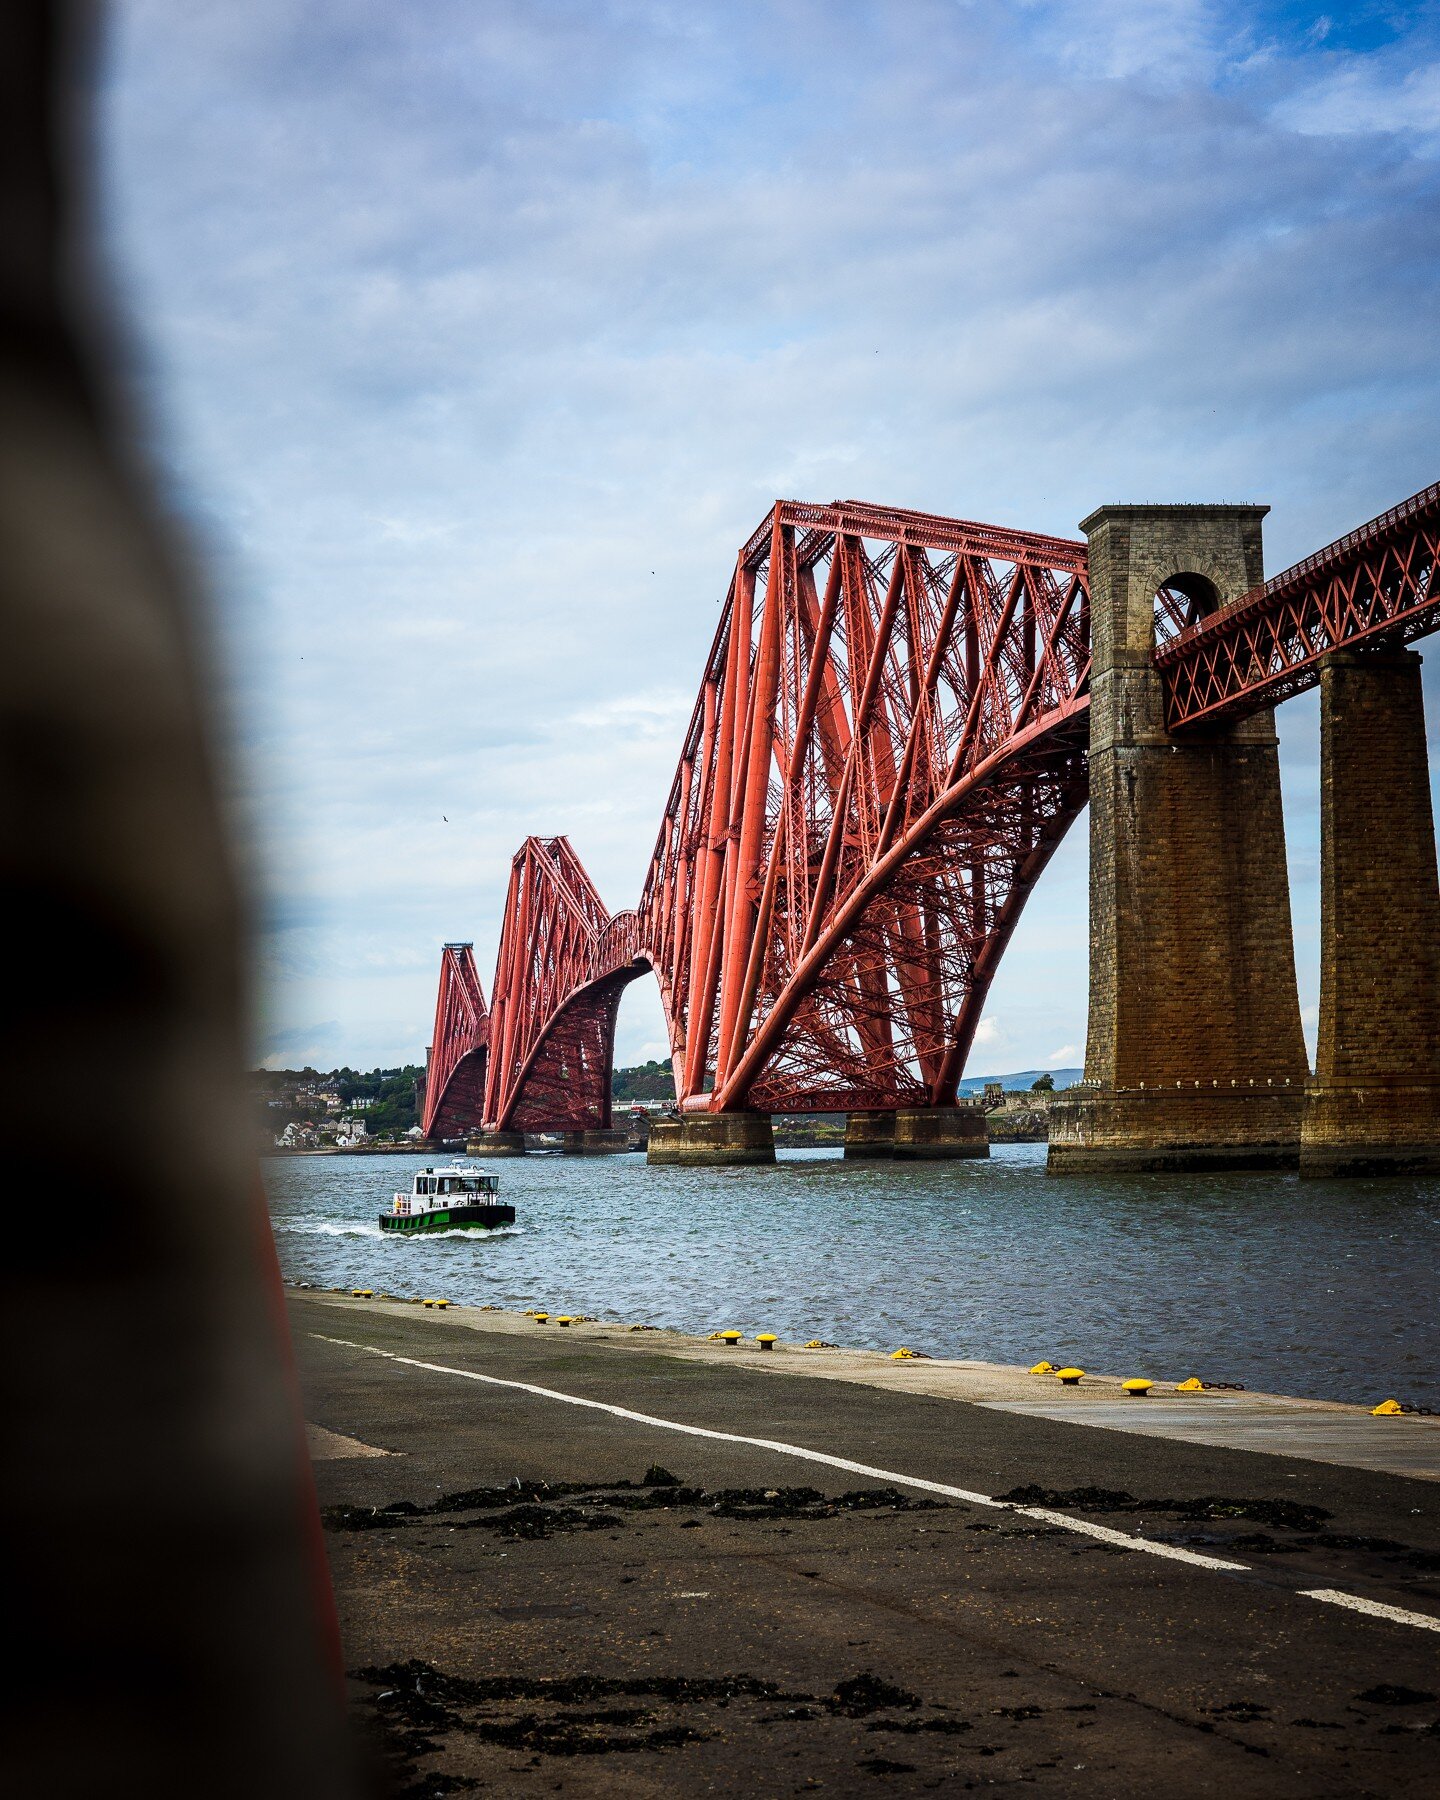 A wee photodump from the most recent trip upto Scotland, have a slide through them treat yourself. I've got hundreds of photos that I've taken and edited over the past weeks but cba to post so cya ✌️
.
.
.
.
.
.
.
.
#dump #northqueensferry
#fife
#edi